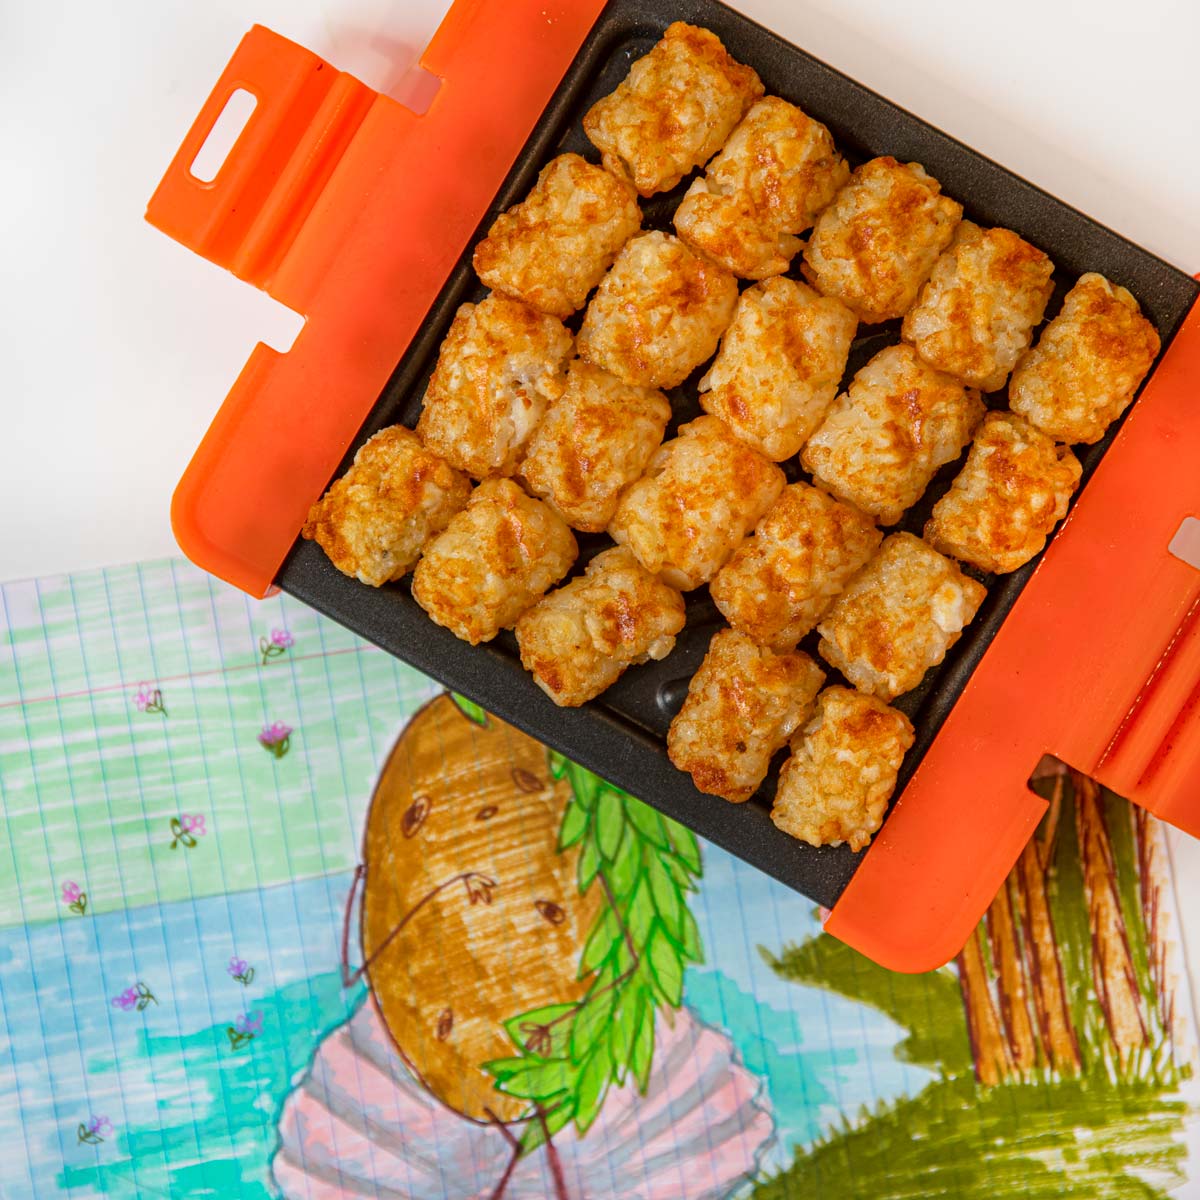 Can You Microwave Tater Tots?